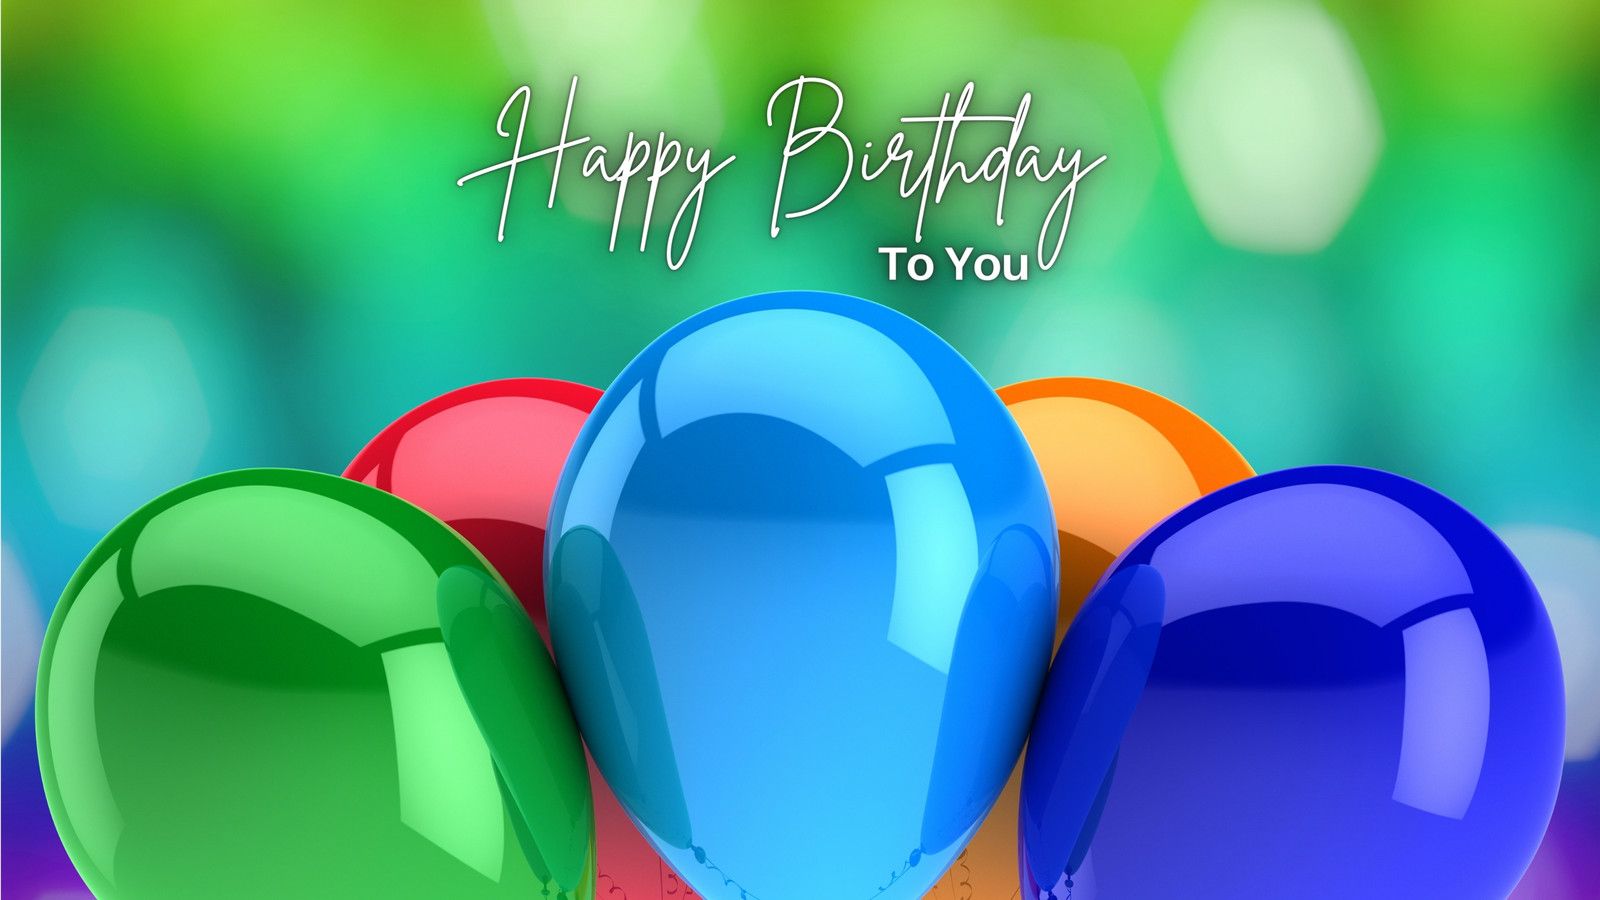 A birthday card with balloons and the words 